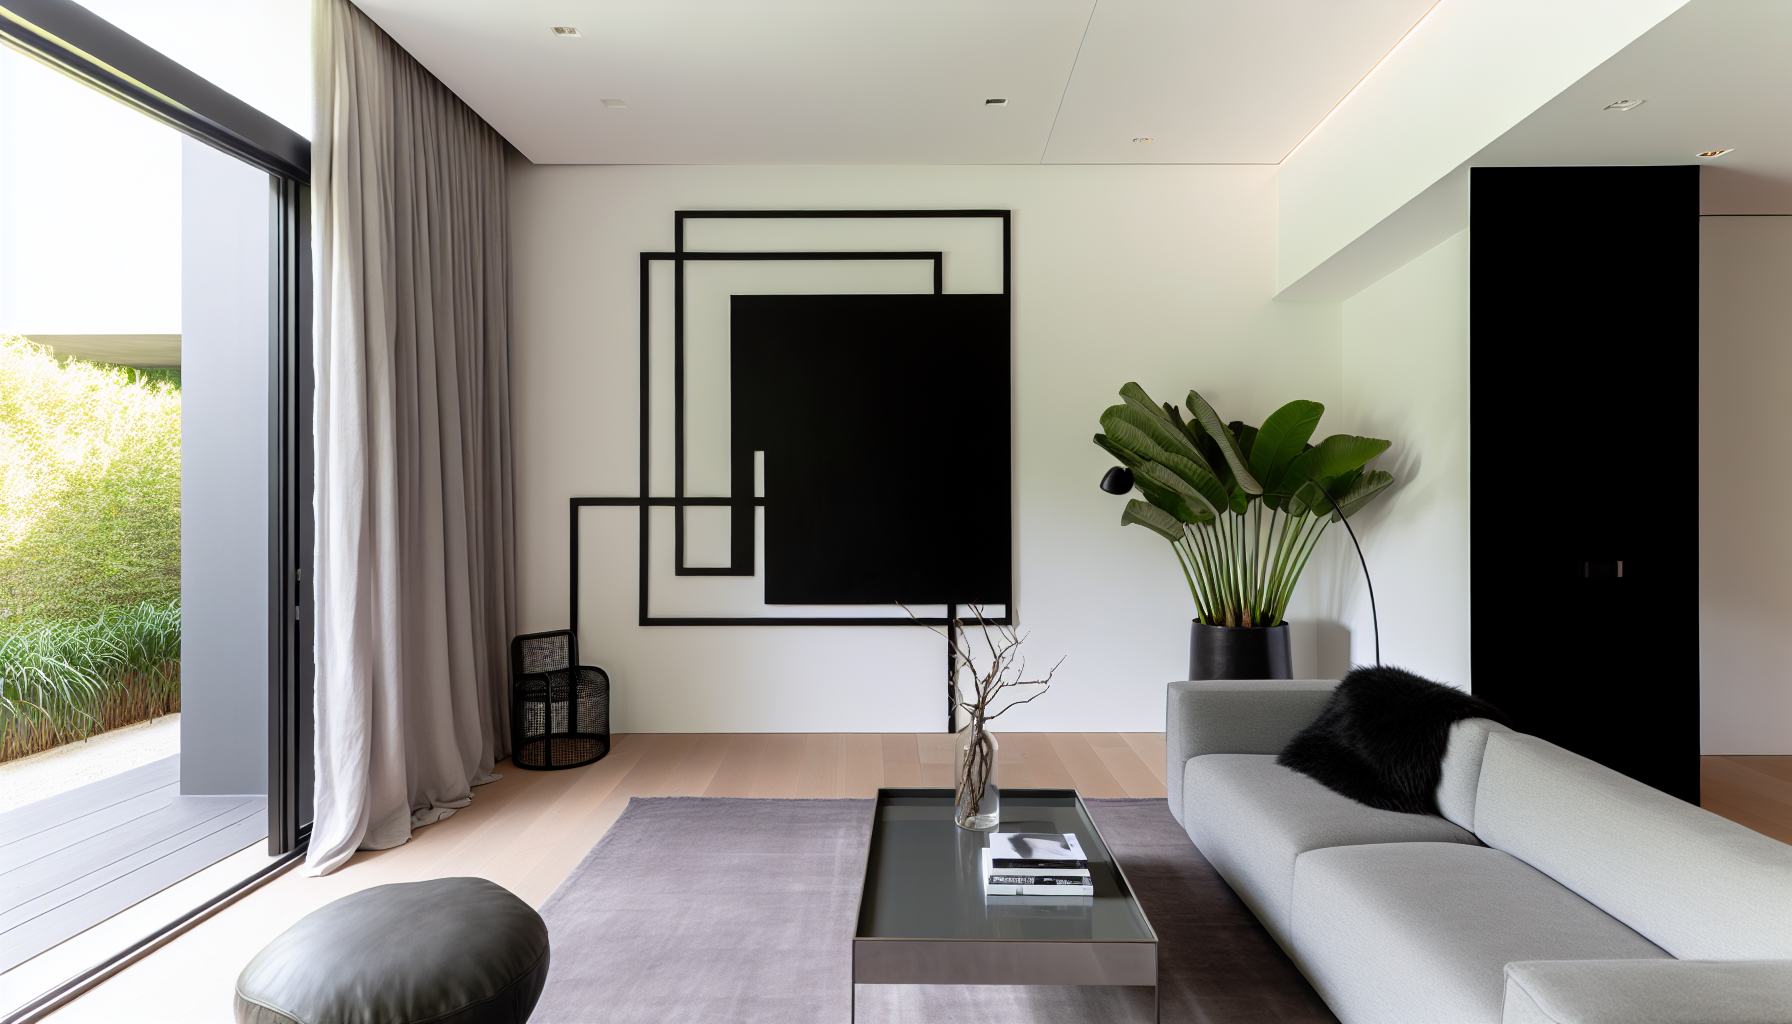 Minimalist black wall art in a contemporary living room setting